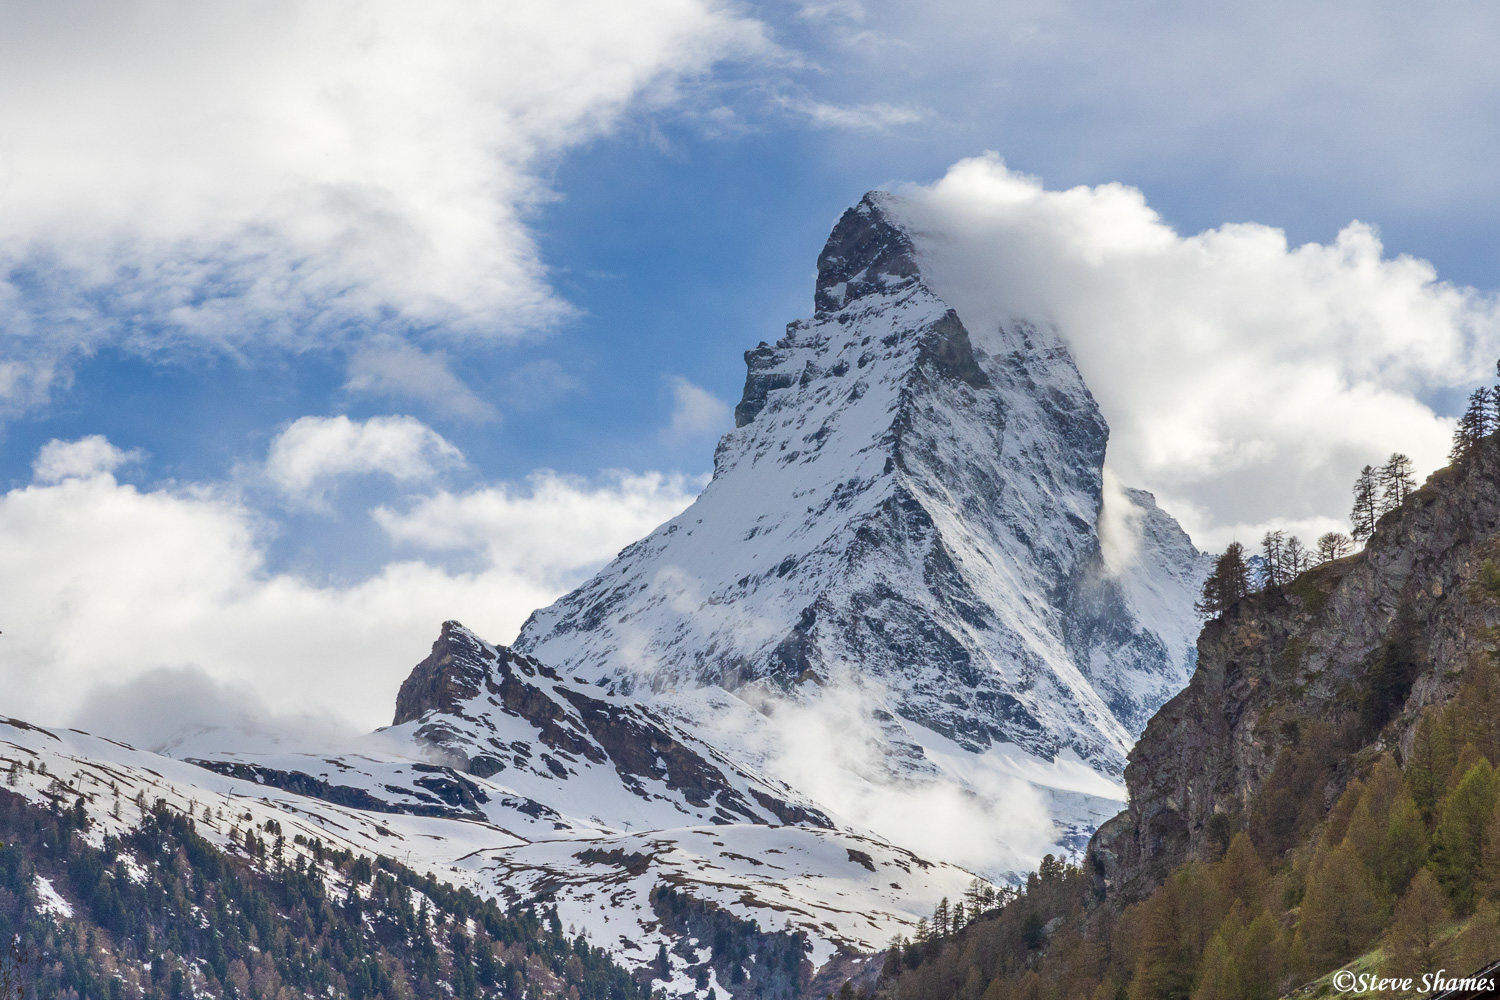 Another close up of the Matterhorn. It seems to make its own clouds.